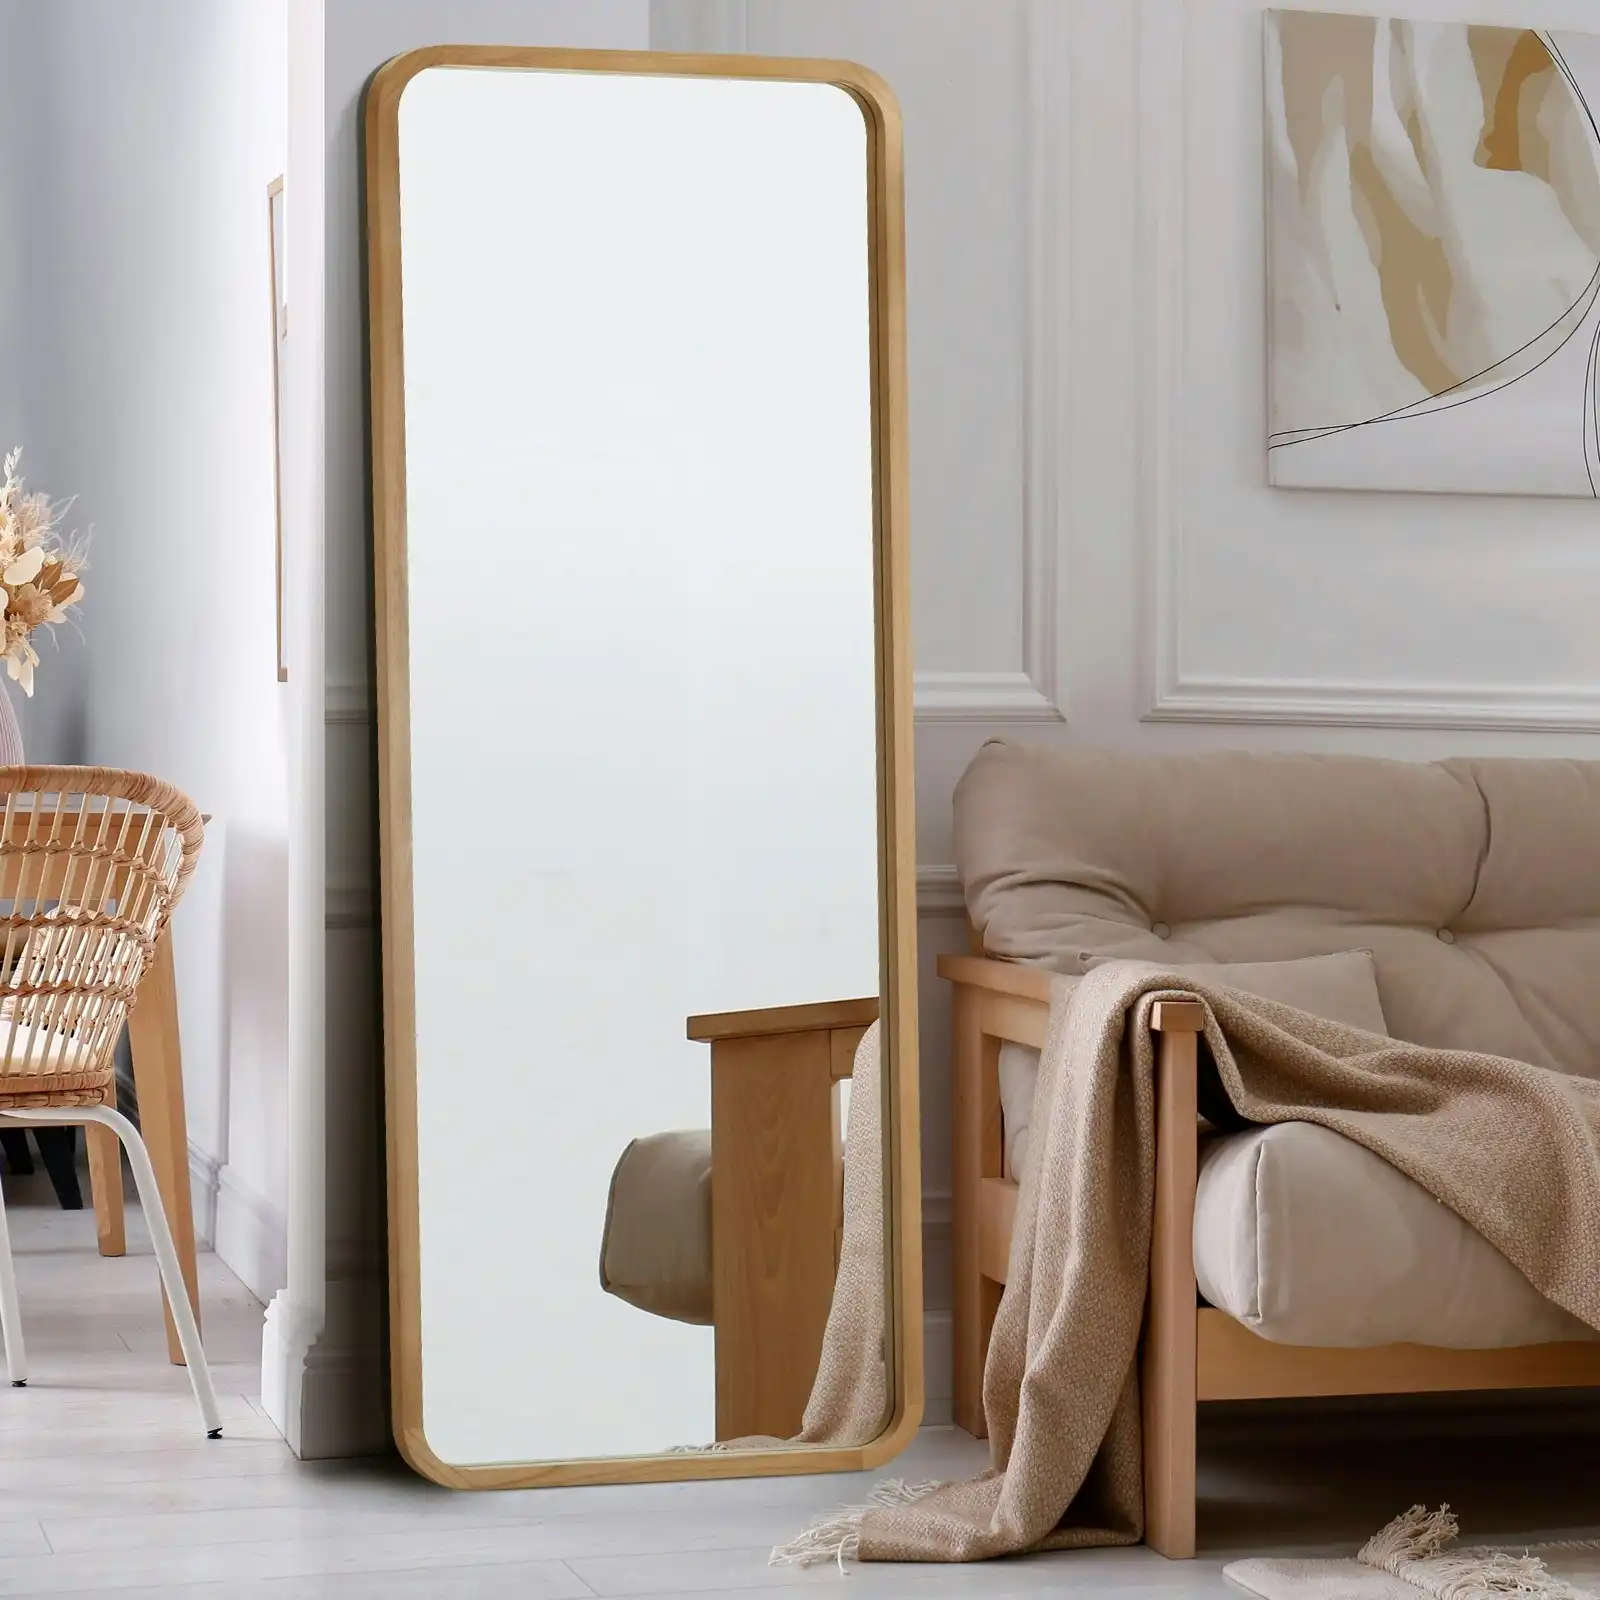 Oikiture 166x60cm Wooden Full Length Mirror Rectangle Dressing Floor Mirrors